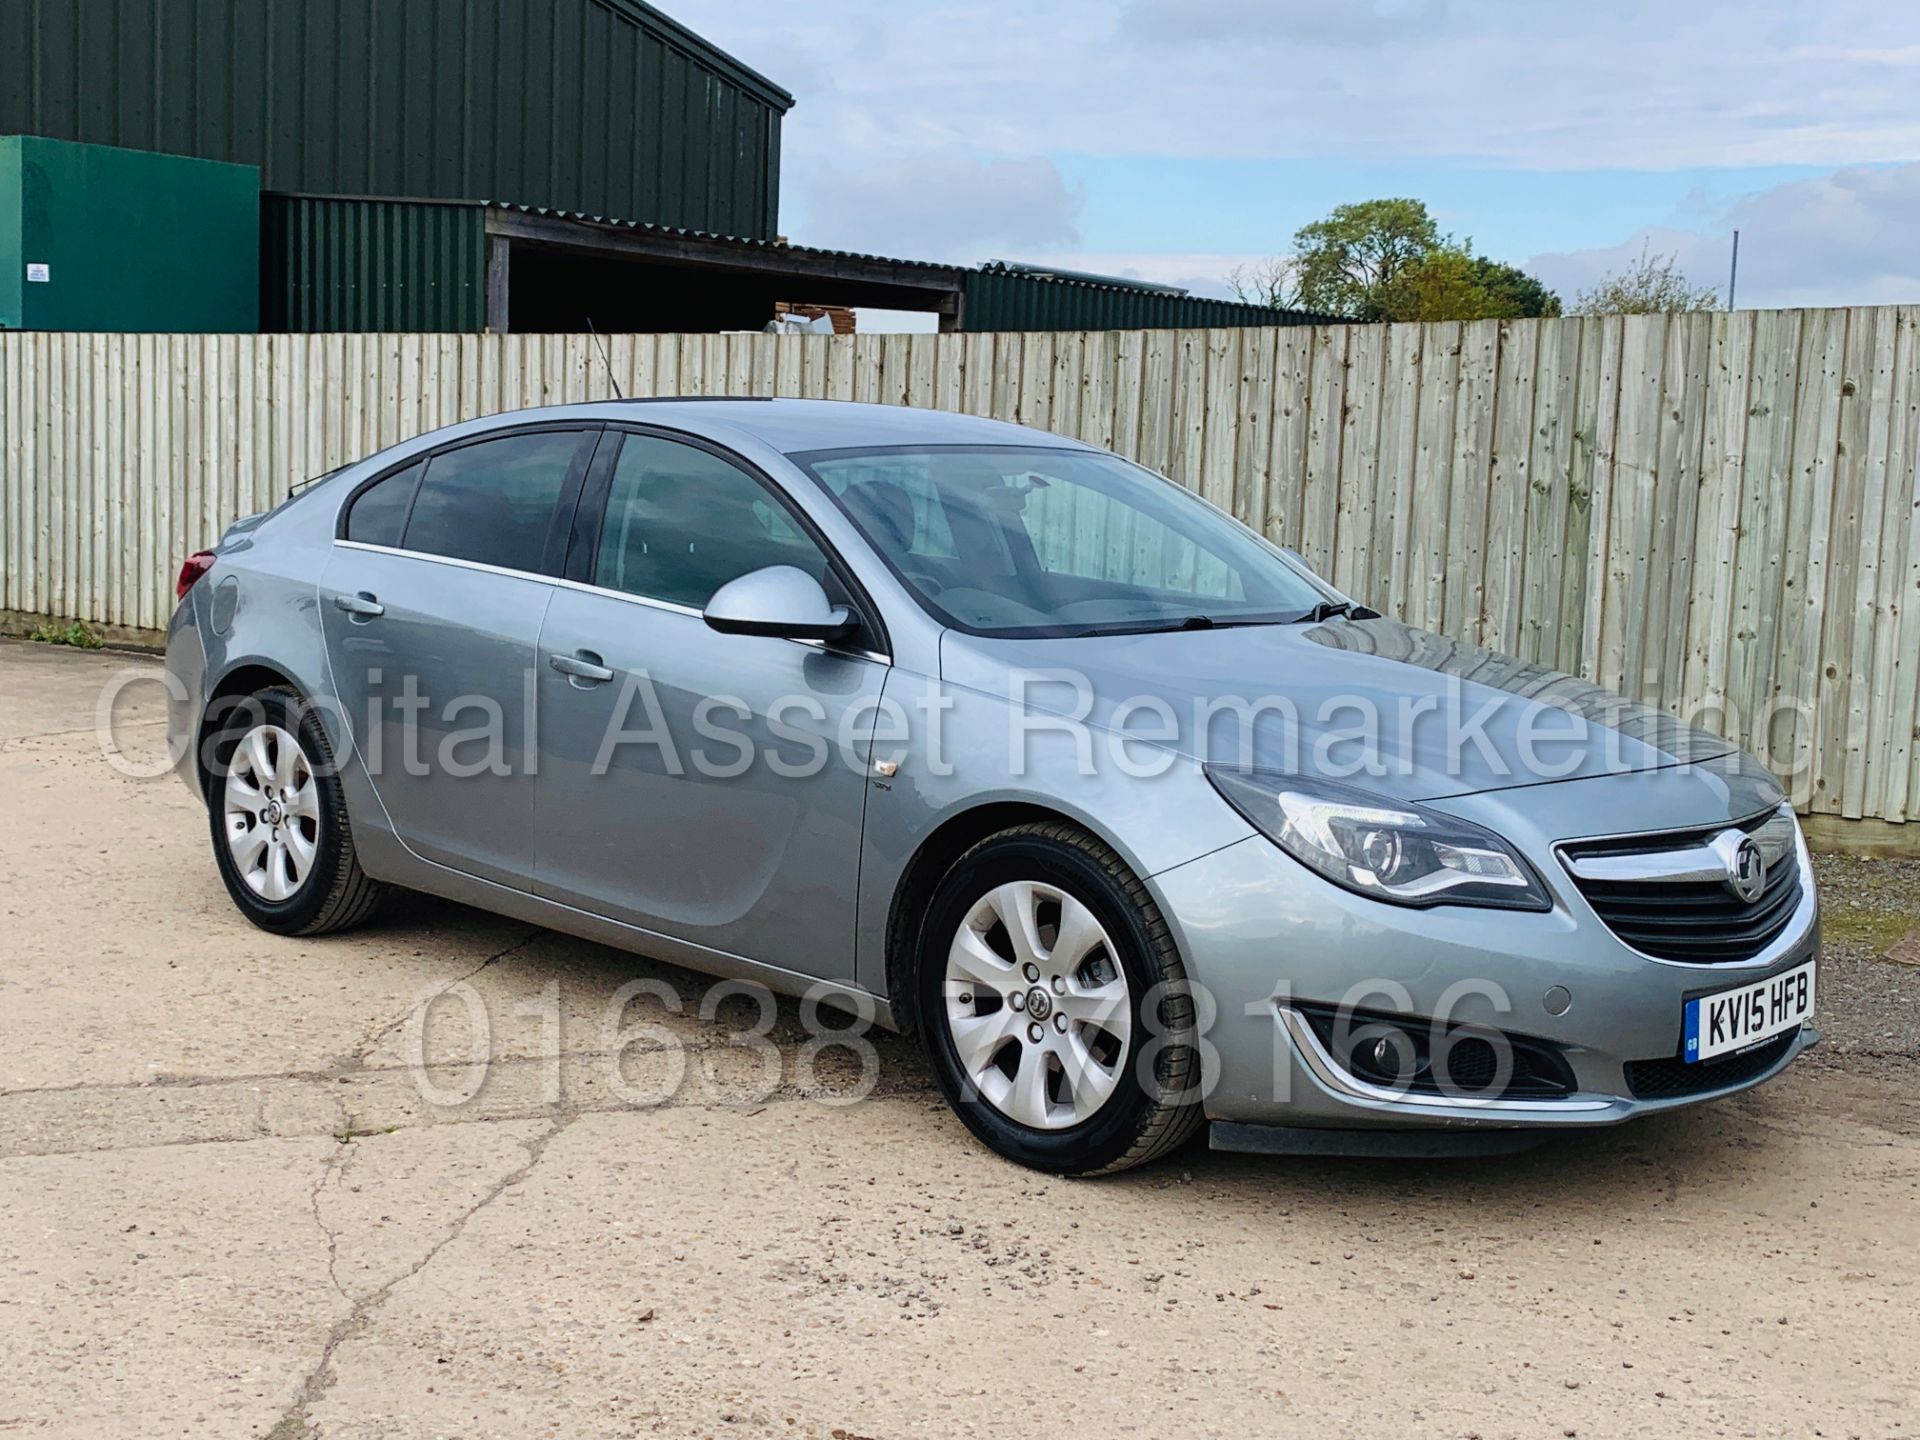 (On Sale) VAUXHALL INSIGNIA *SRI EDITION* (2015) '2.0 CDTI - STOP/START - 6 SPEED' (1 OWNER) - Image 2 of 40